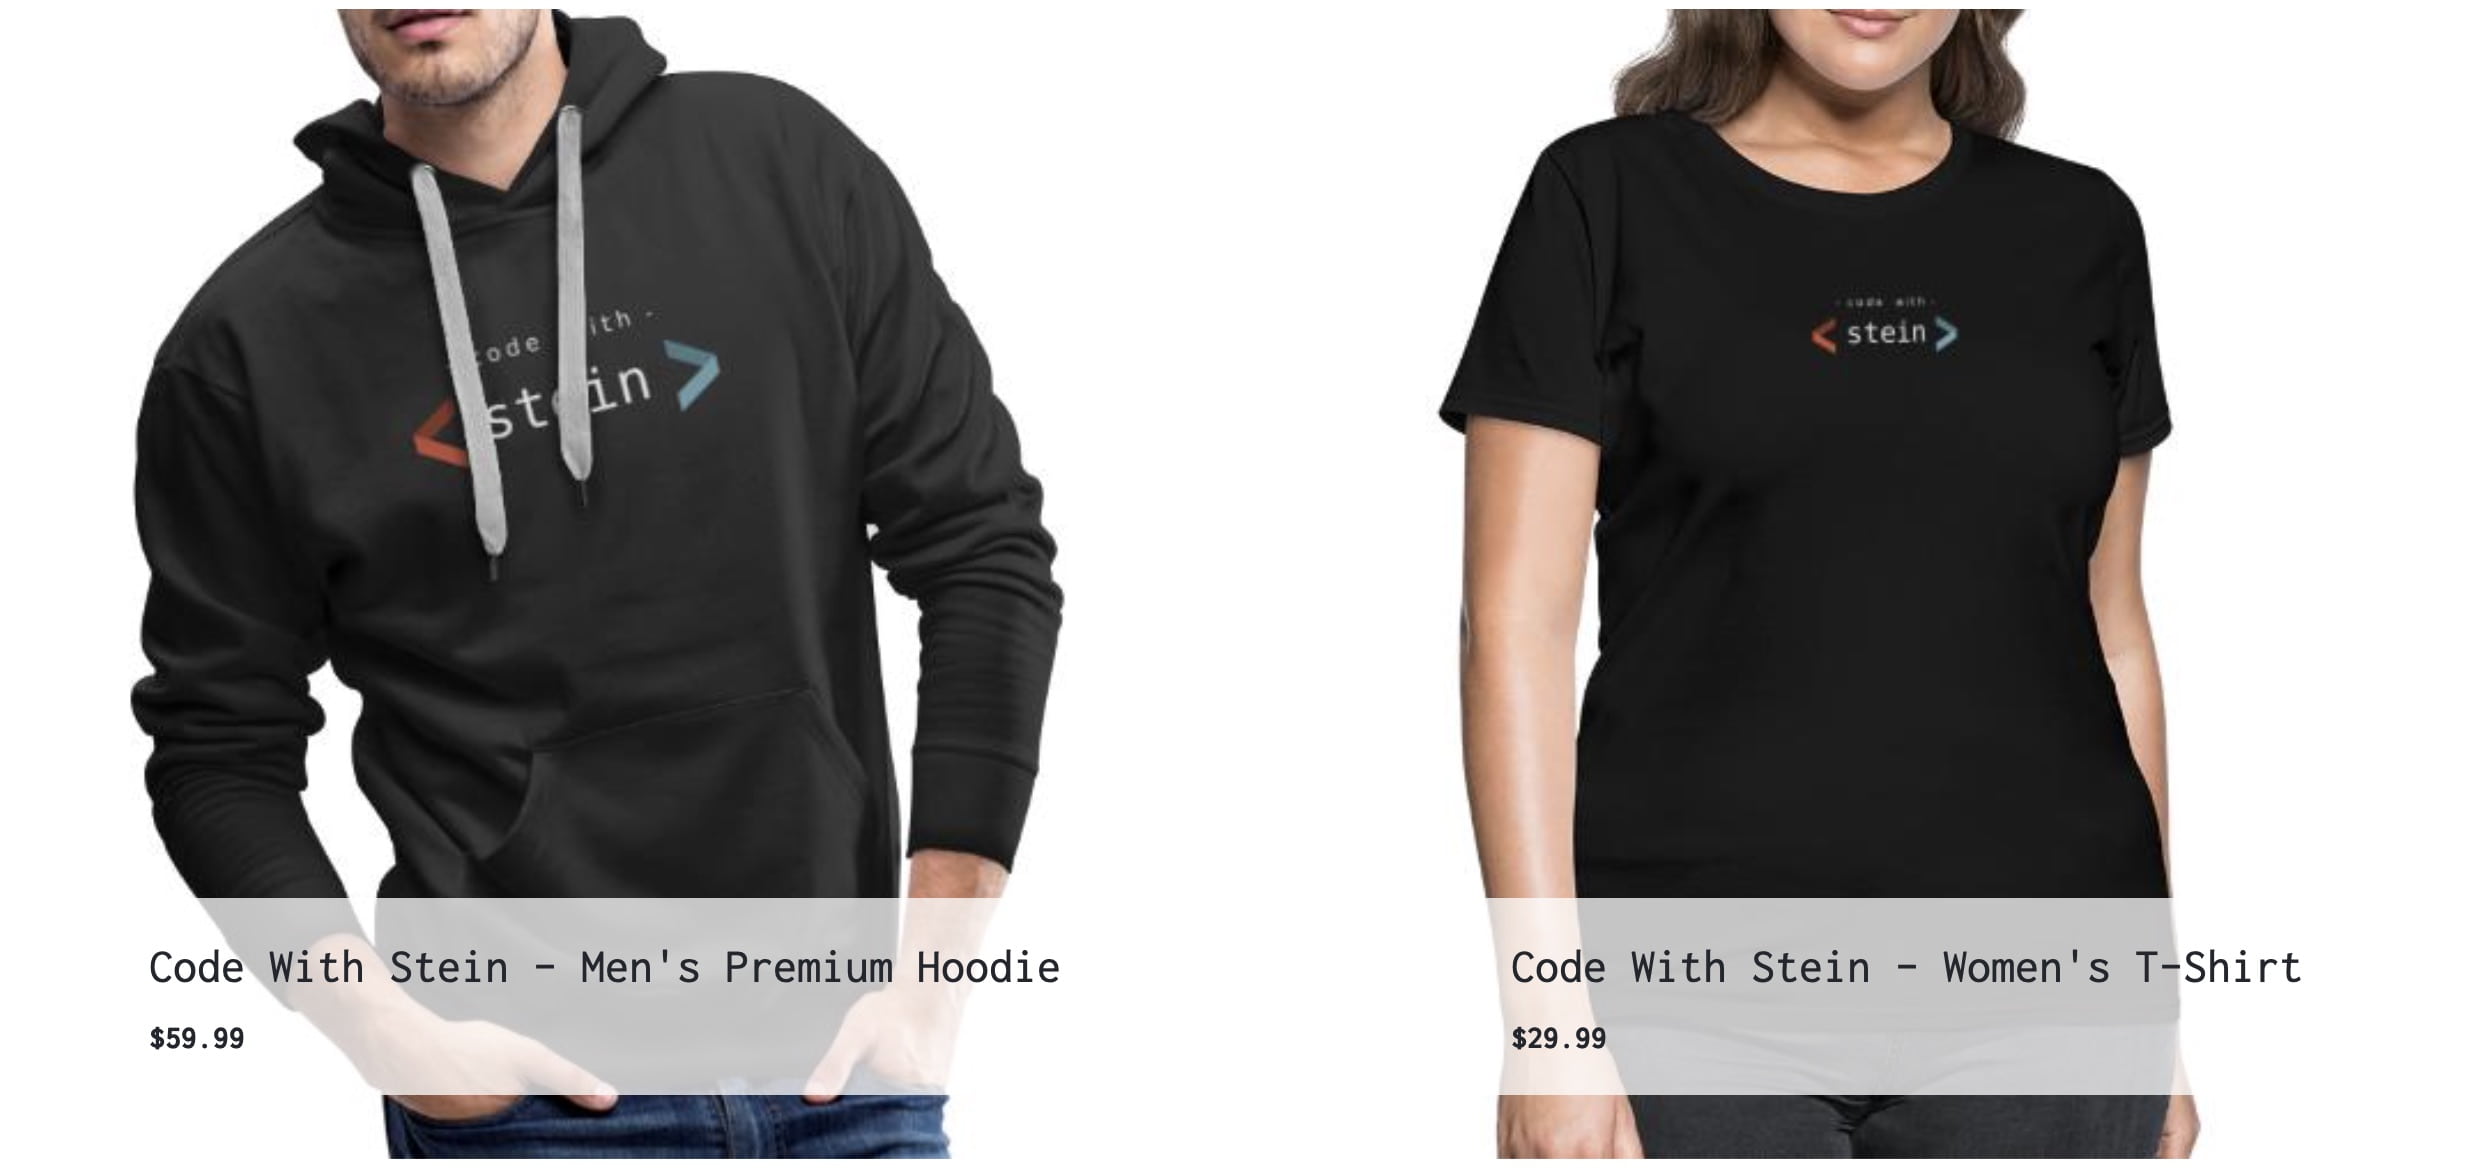 Created merch for Code With Stein